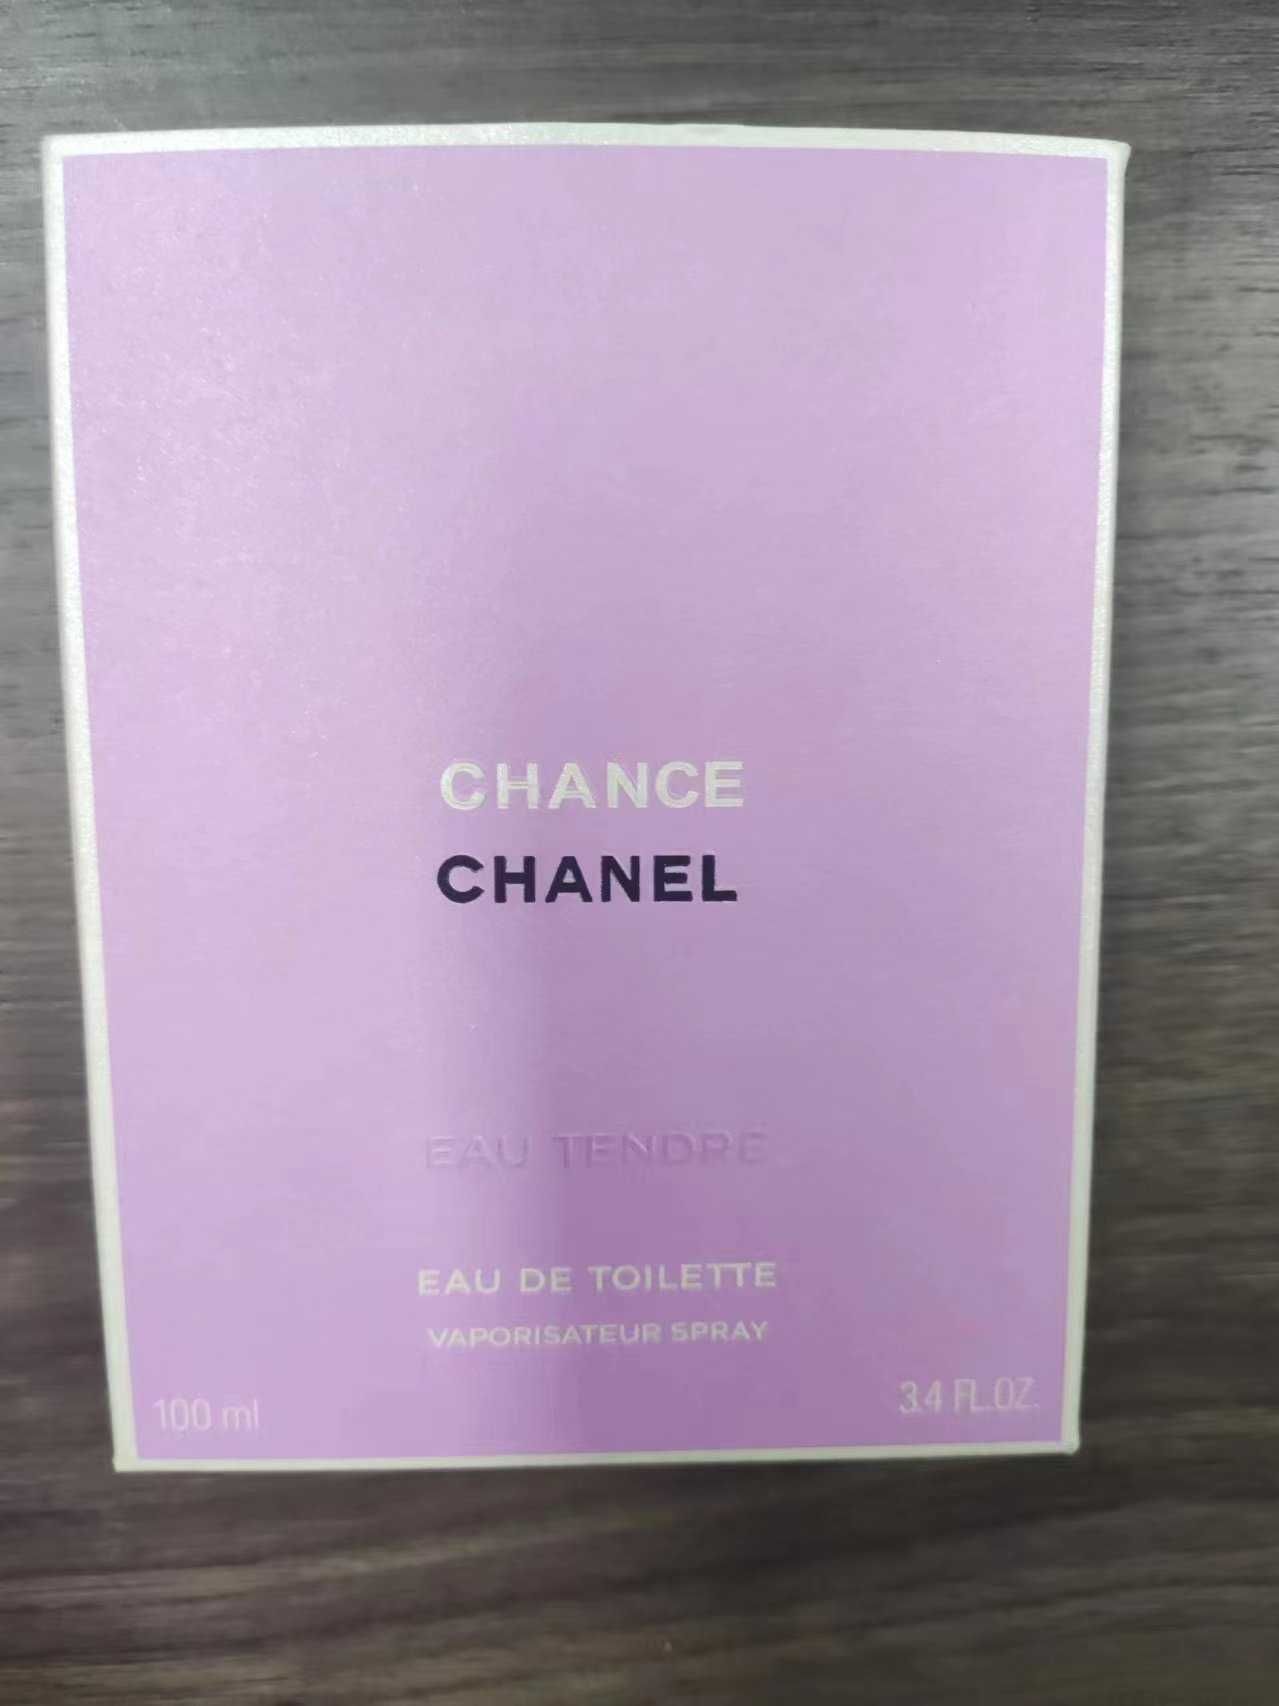 Send your mother beautiful chanel eau tendre